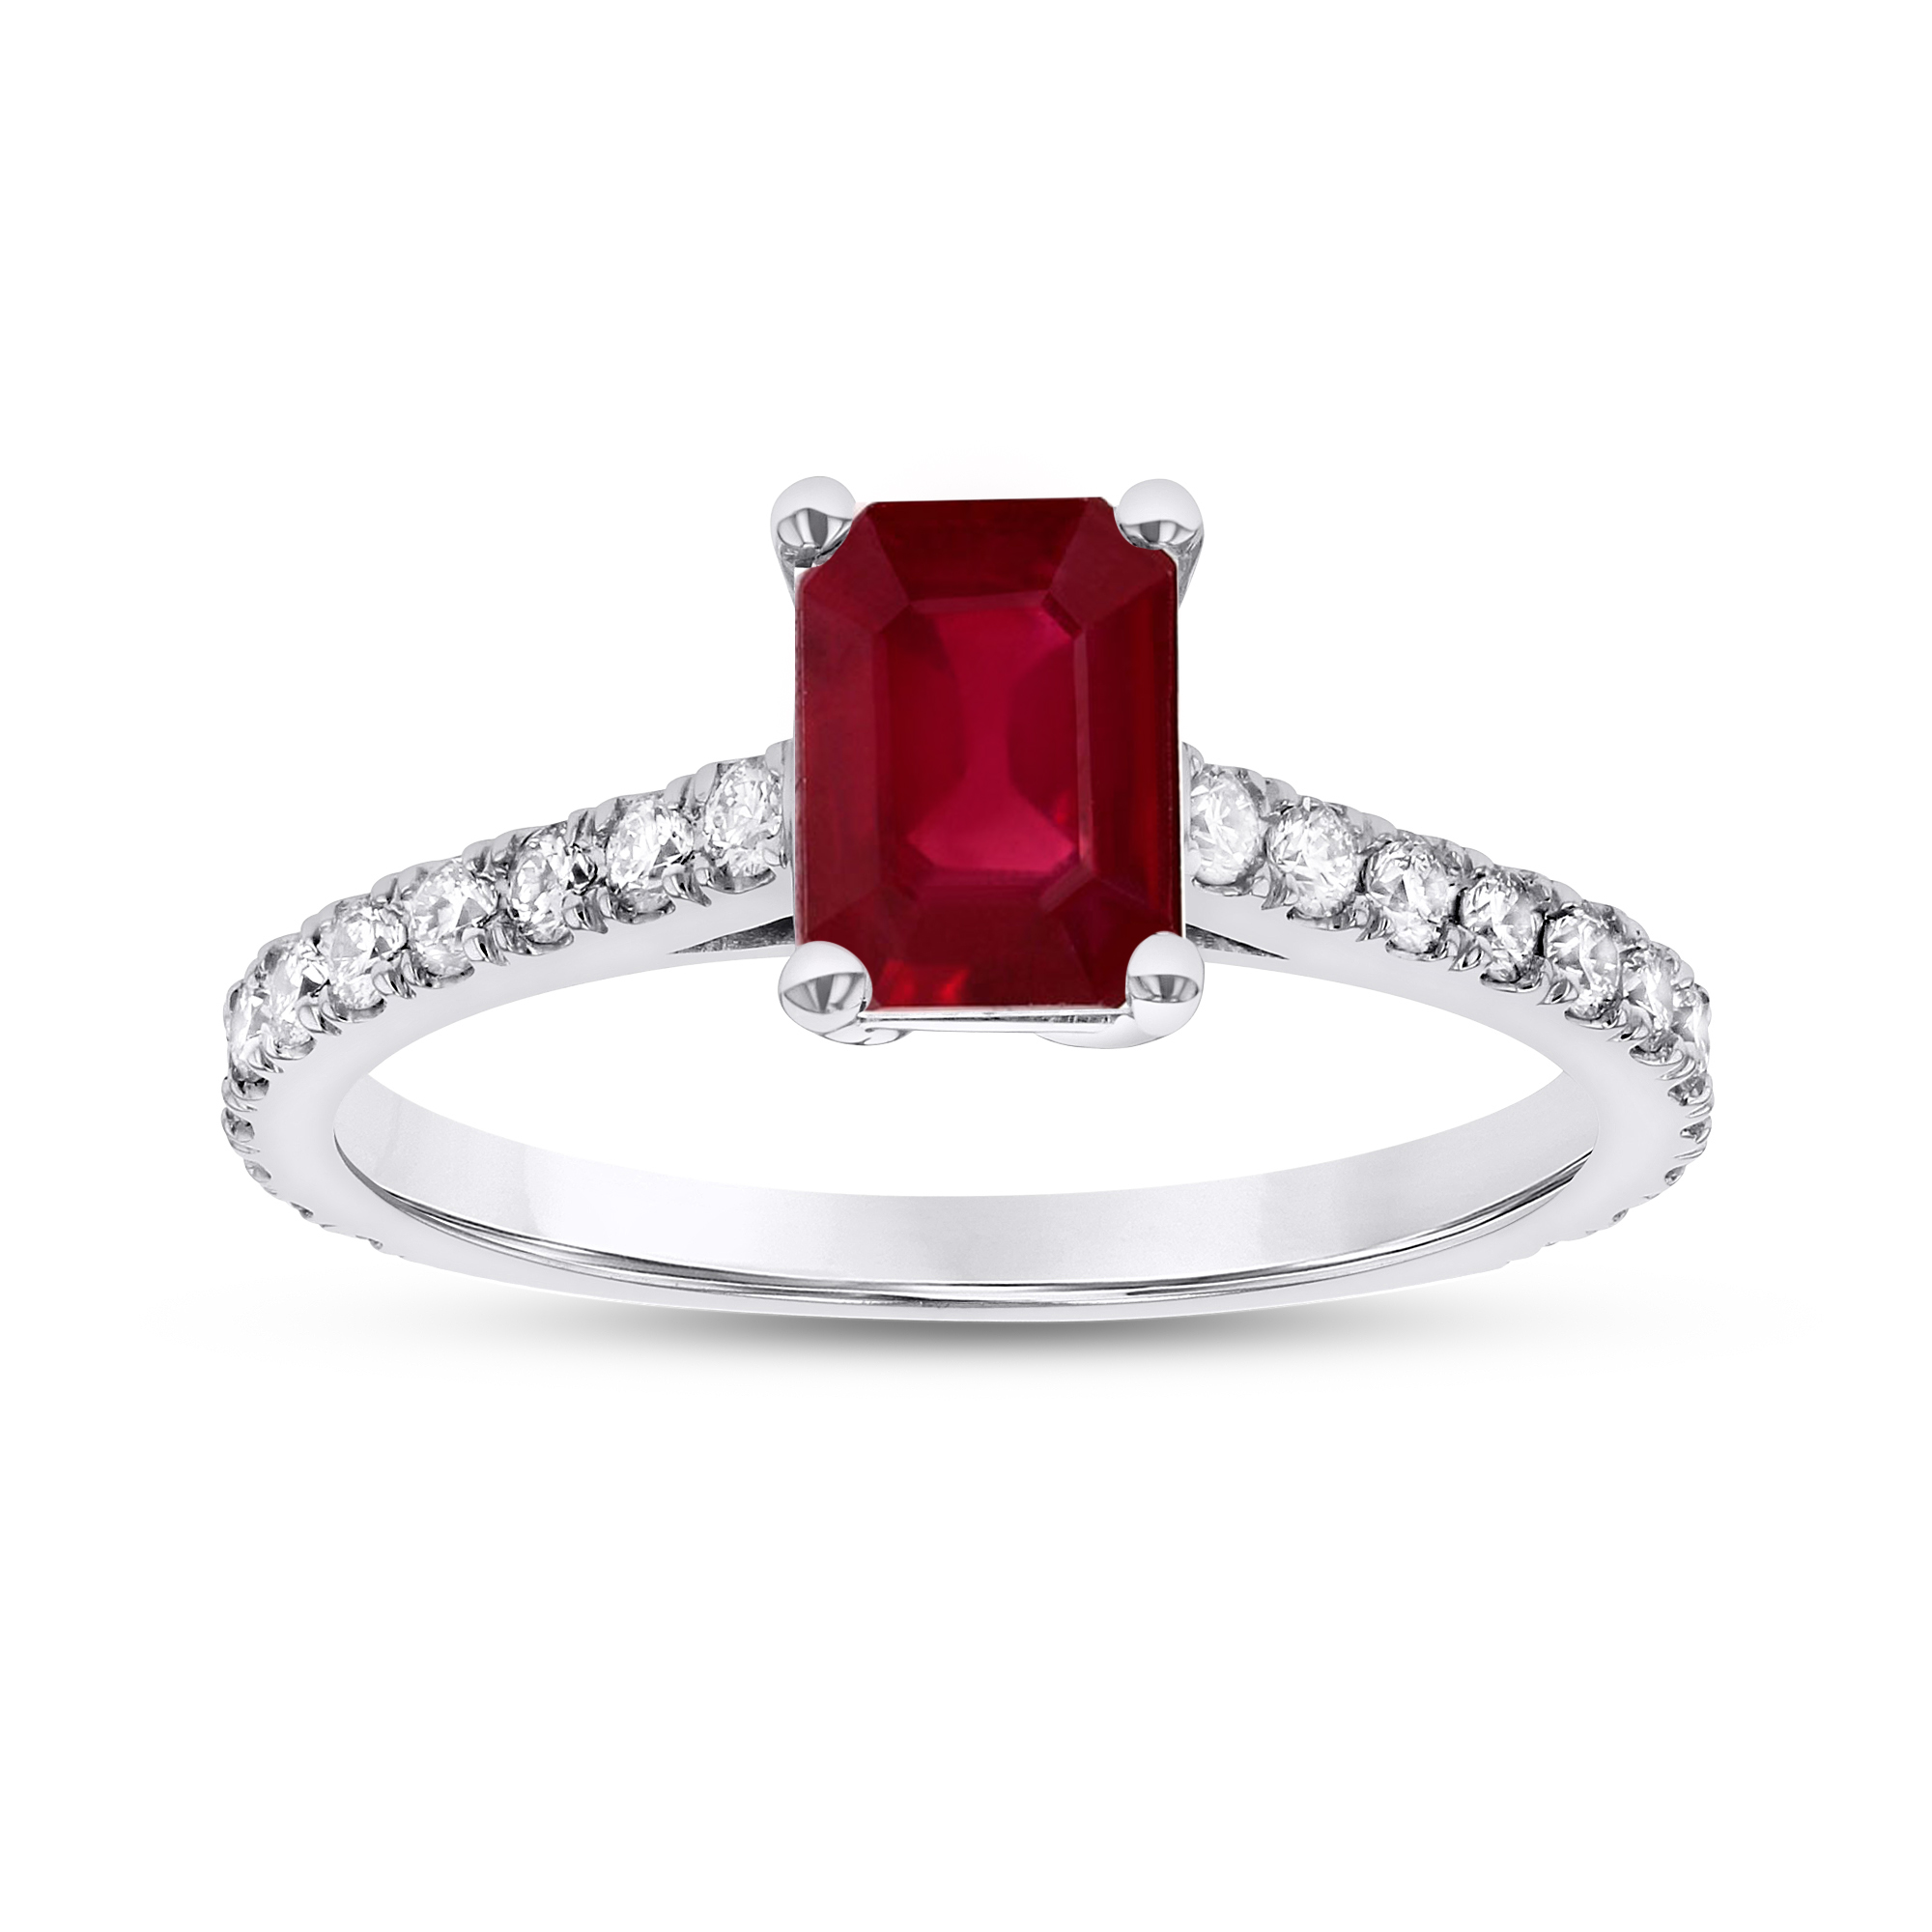 View 0.36ctw Diamond and Emerald Cut Ruby Engagement Ring in 14k White Gold